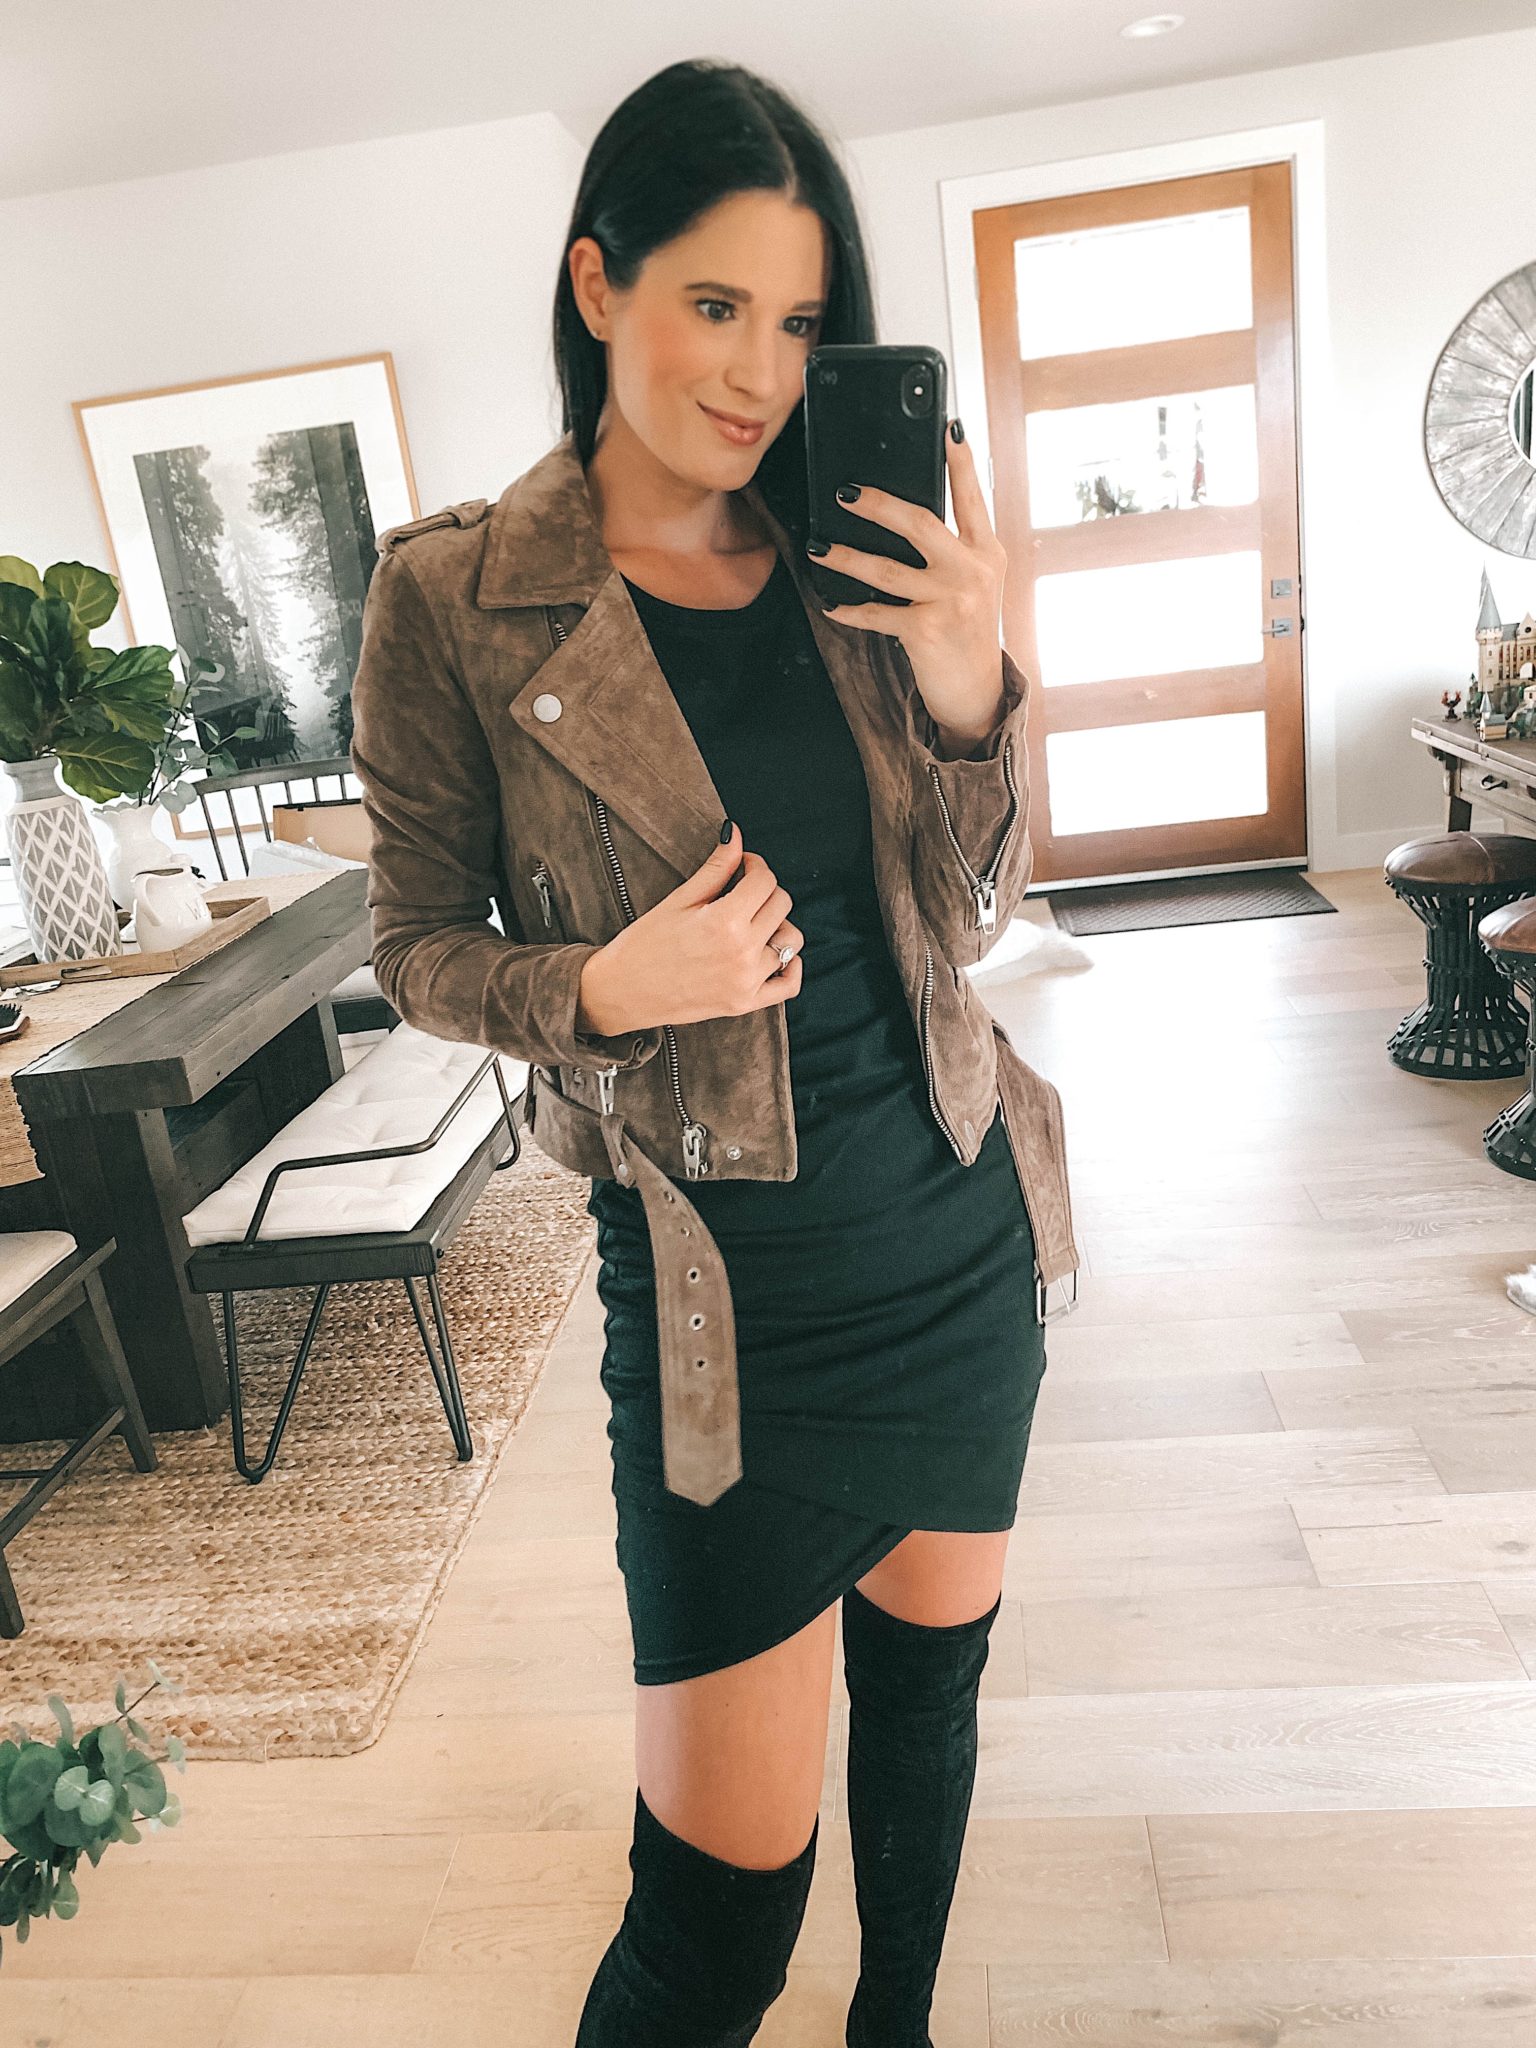 Sale Alert - Two Must Have Versatile Dresses for Summer by popular Austin fashion blog, Dressed to Kill: image of a woman wearing a black with a black Leith Ruched Body-Con Tank Dress with a BlankNYC Moto Jacket.